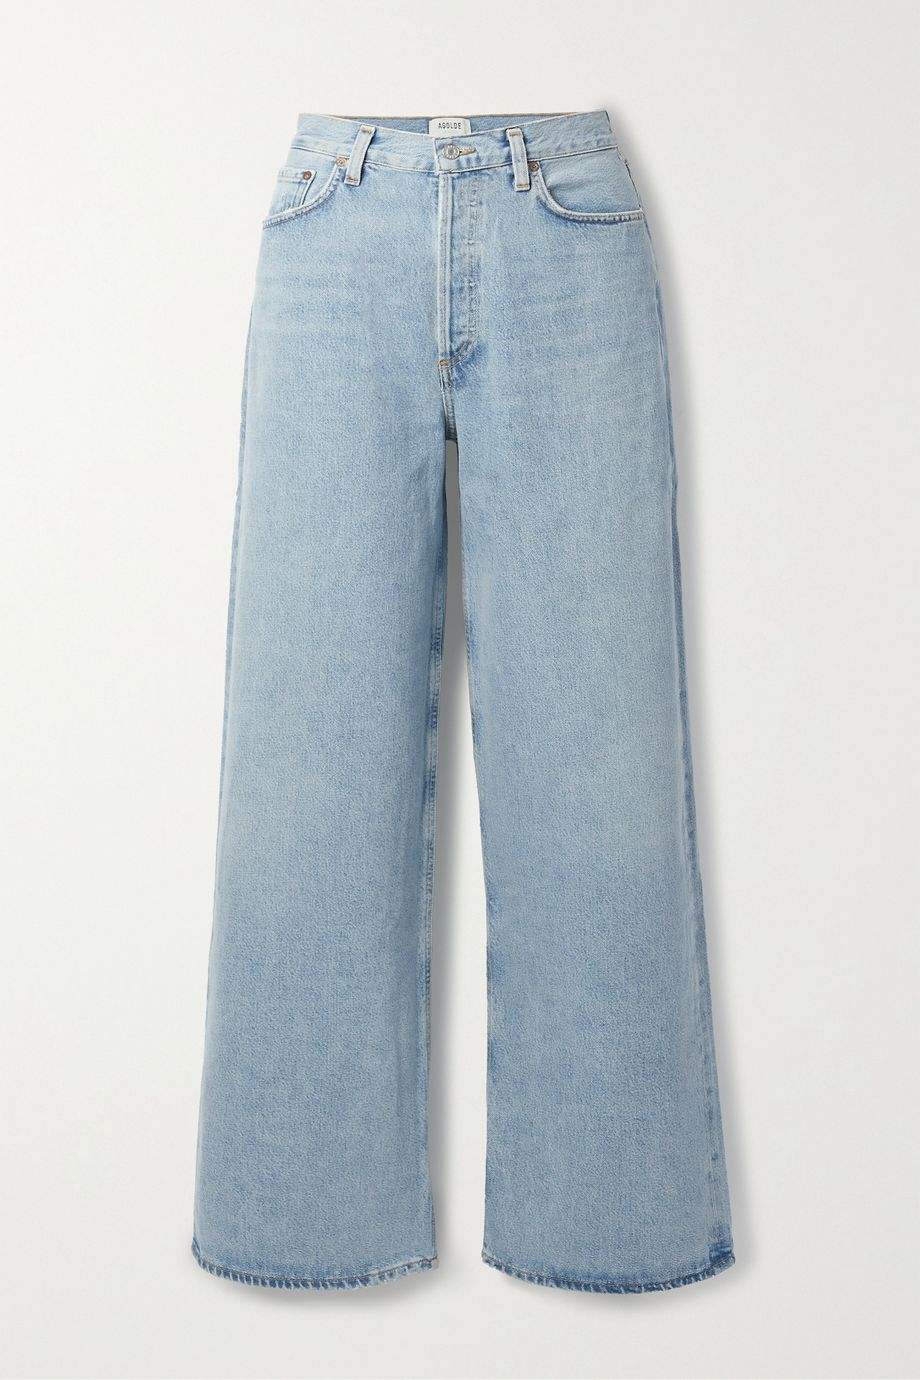 Agolde Baggy Low-Rise Organic Jeans